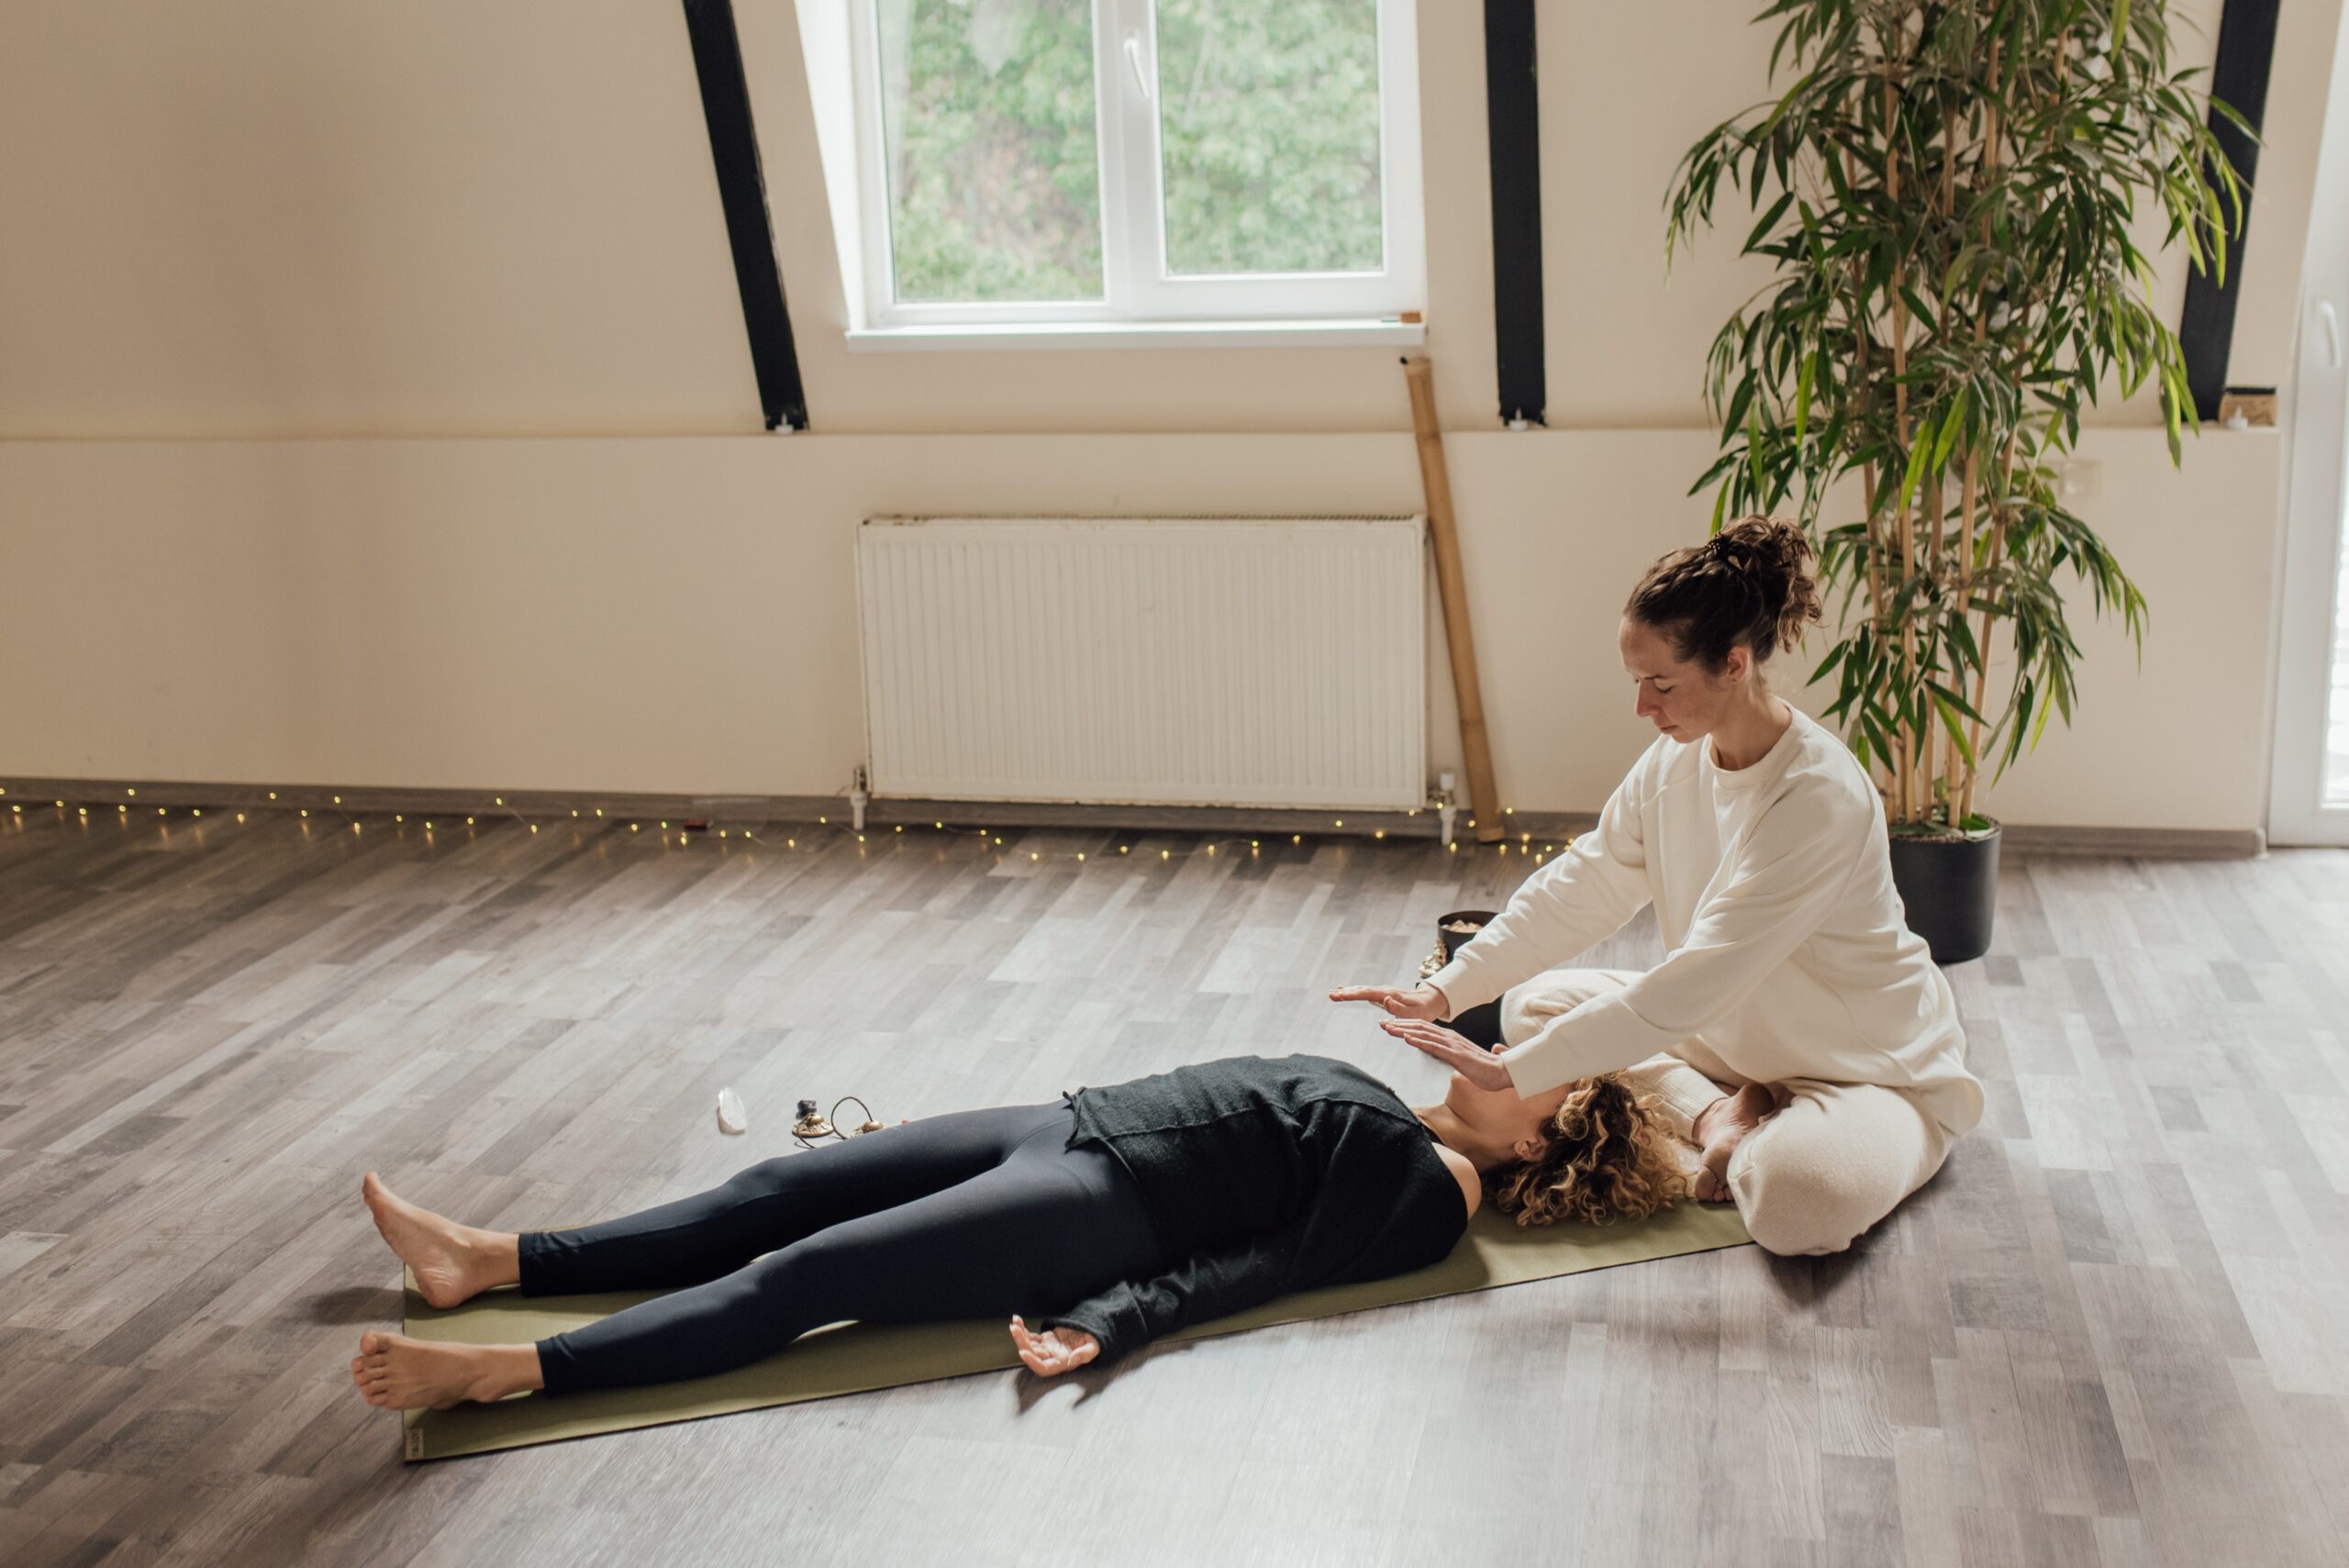 A person lying on a yoga mat in a white room with wooden floors and a plant having an energy healing alternative therapy